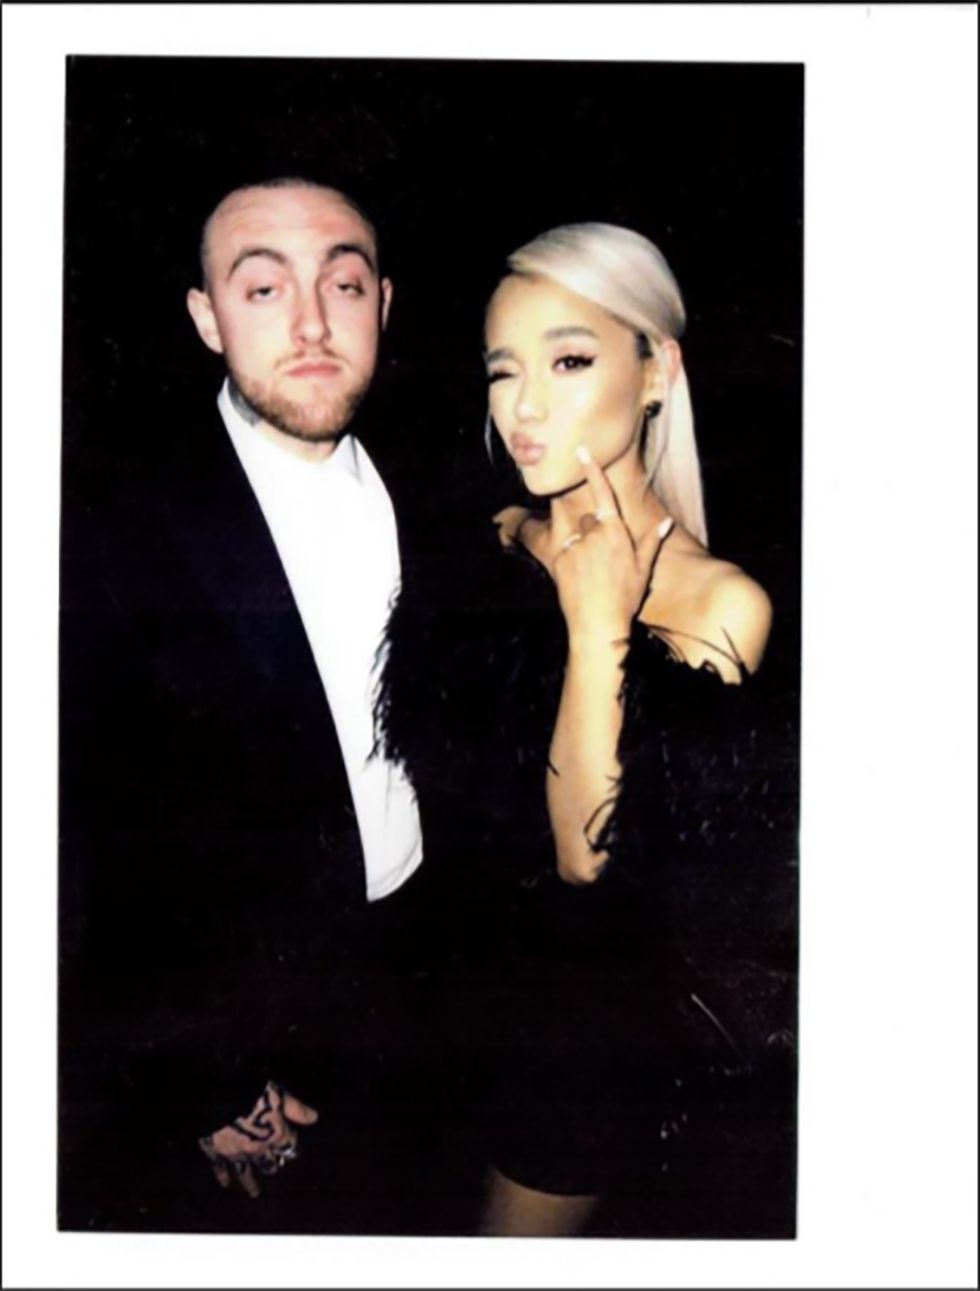 Ariana Grande Makes Her First Public Appearance Of 2018 - Ariana Attends  Oscars Party With Mac Miller